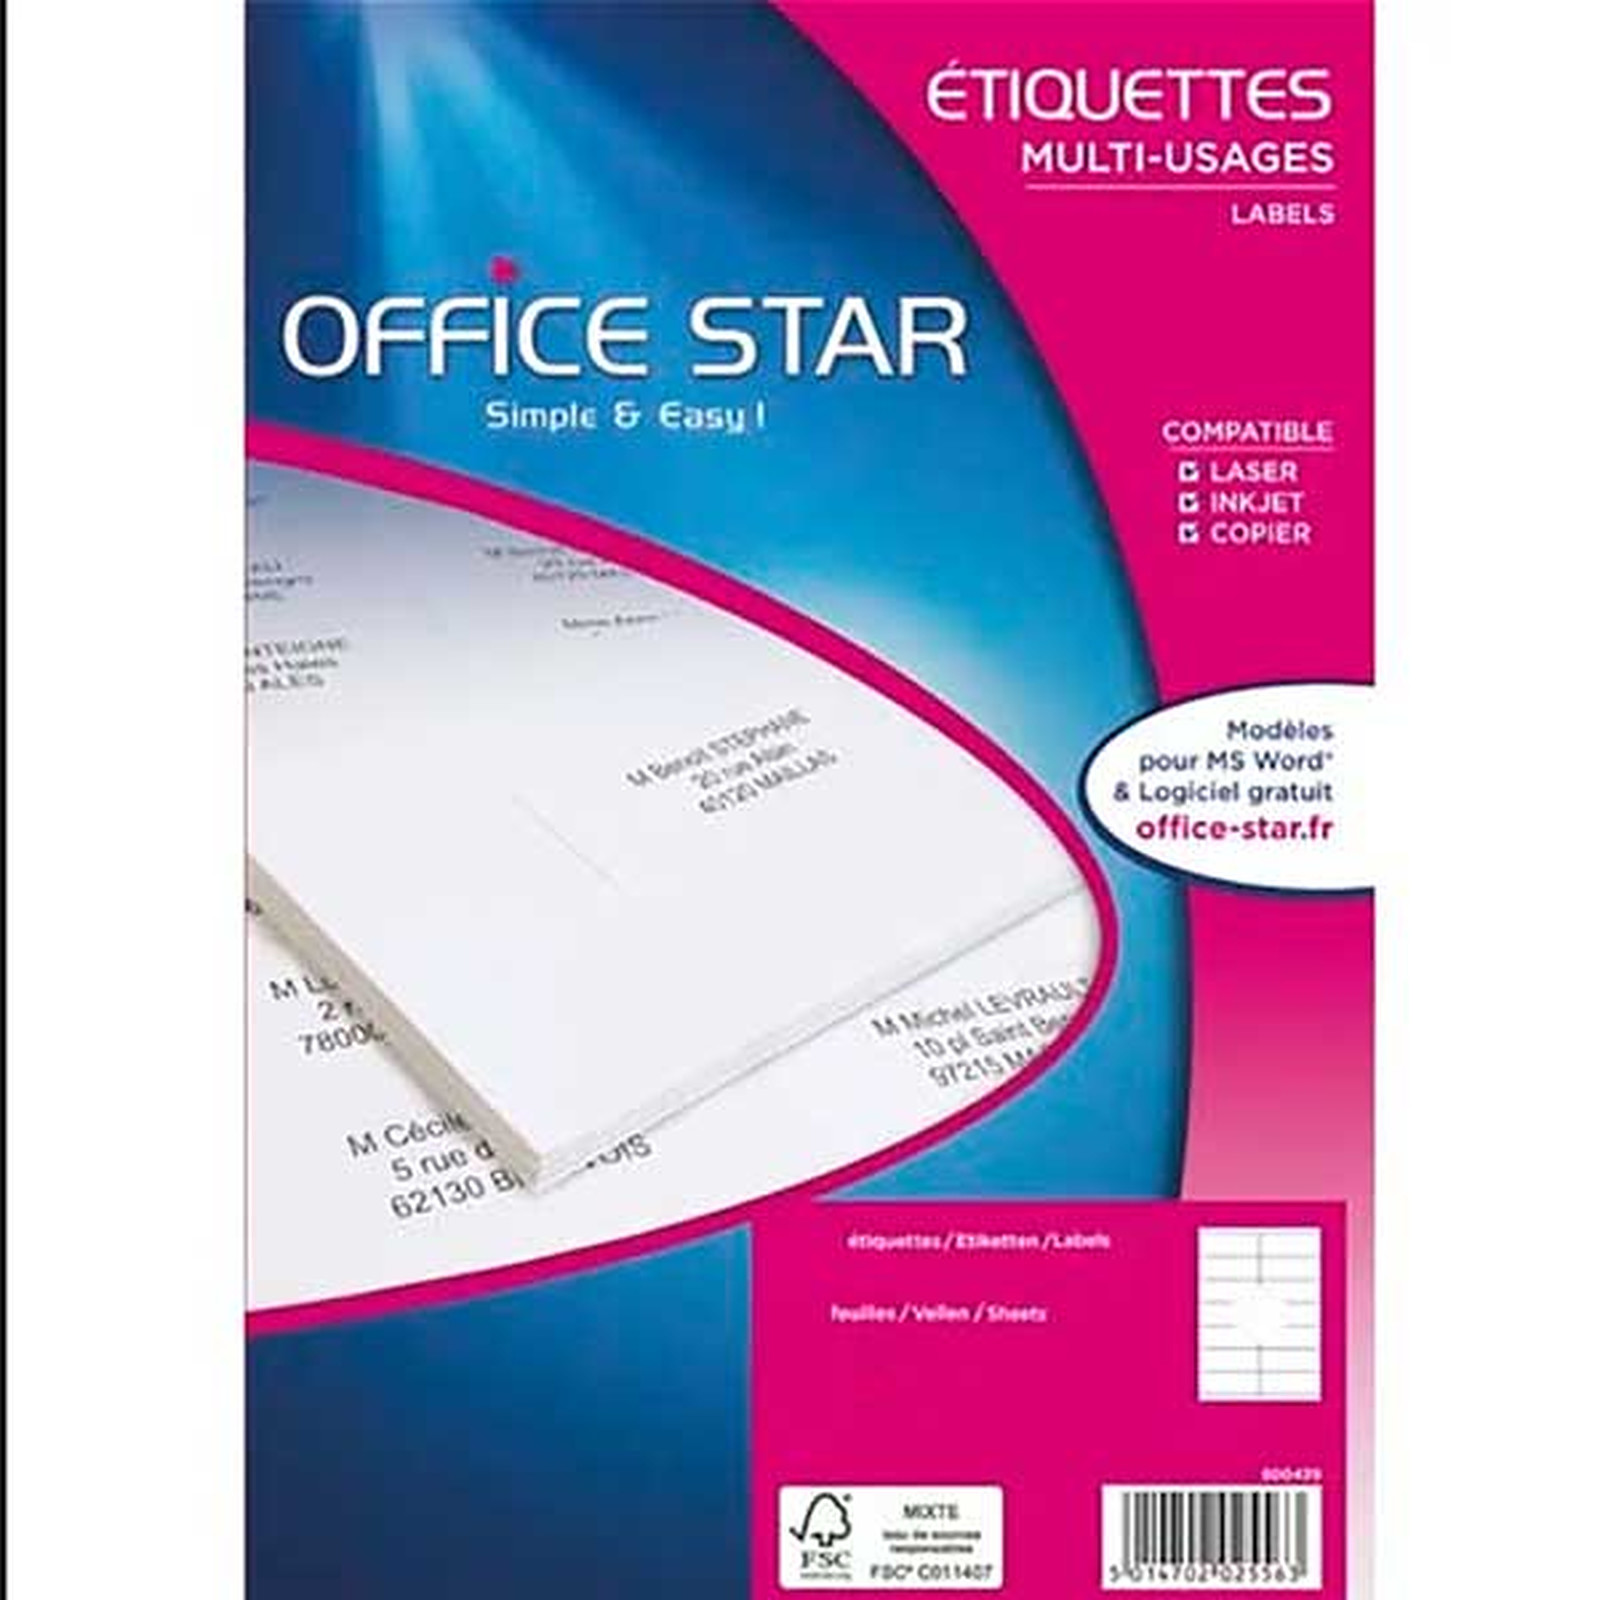 Office Star Etiquettes multi-usage blanches 63.5 x 38.1 mm x 2100 - Etiquette Office Star